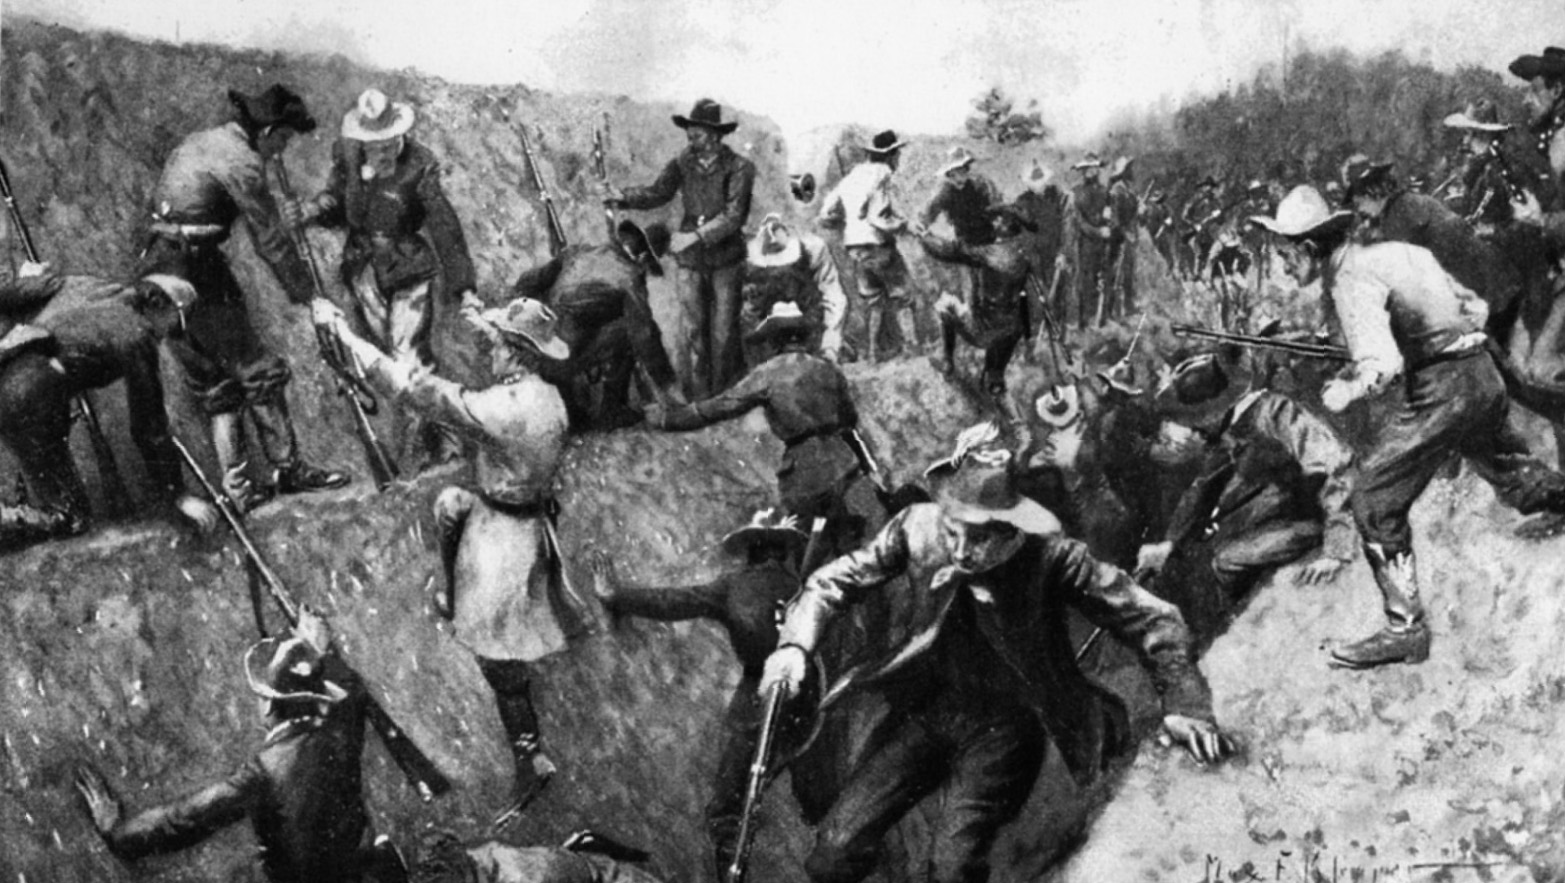 Forrest’s men clamber up the sides of the Union earthworks at Fort Pillow. The fury of the Confederate assault produced an almost immediate rout among the fort’s defenders.